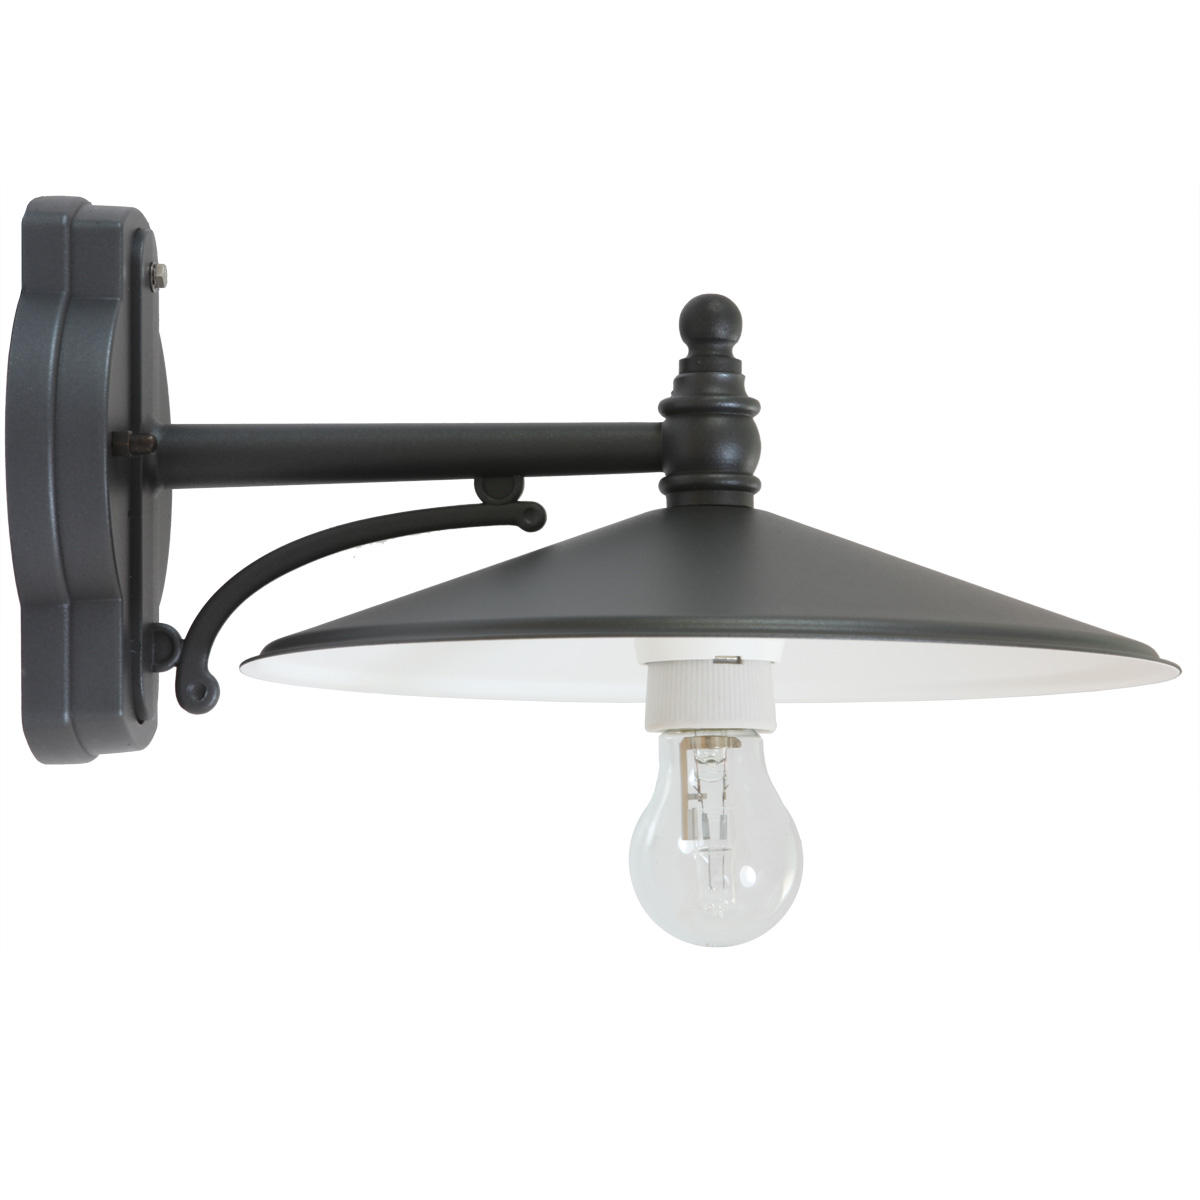 Classic outdoor lamp from Tuscany